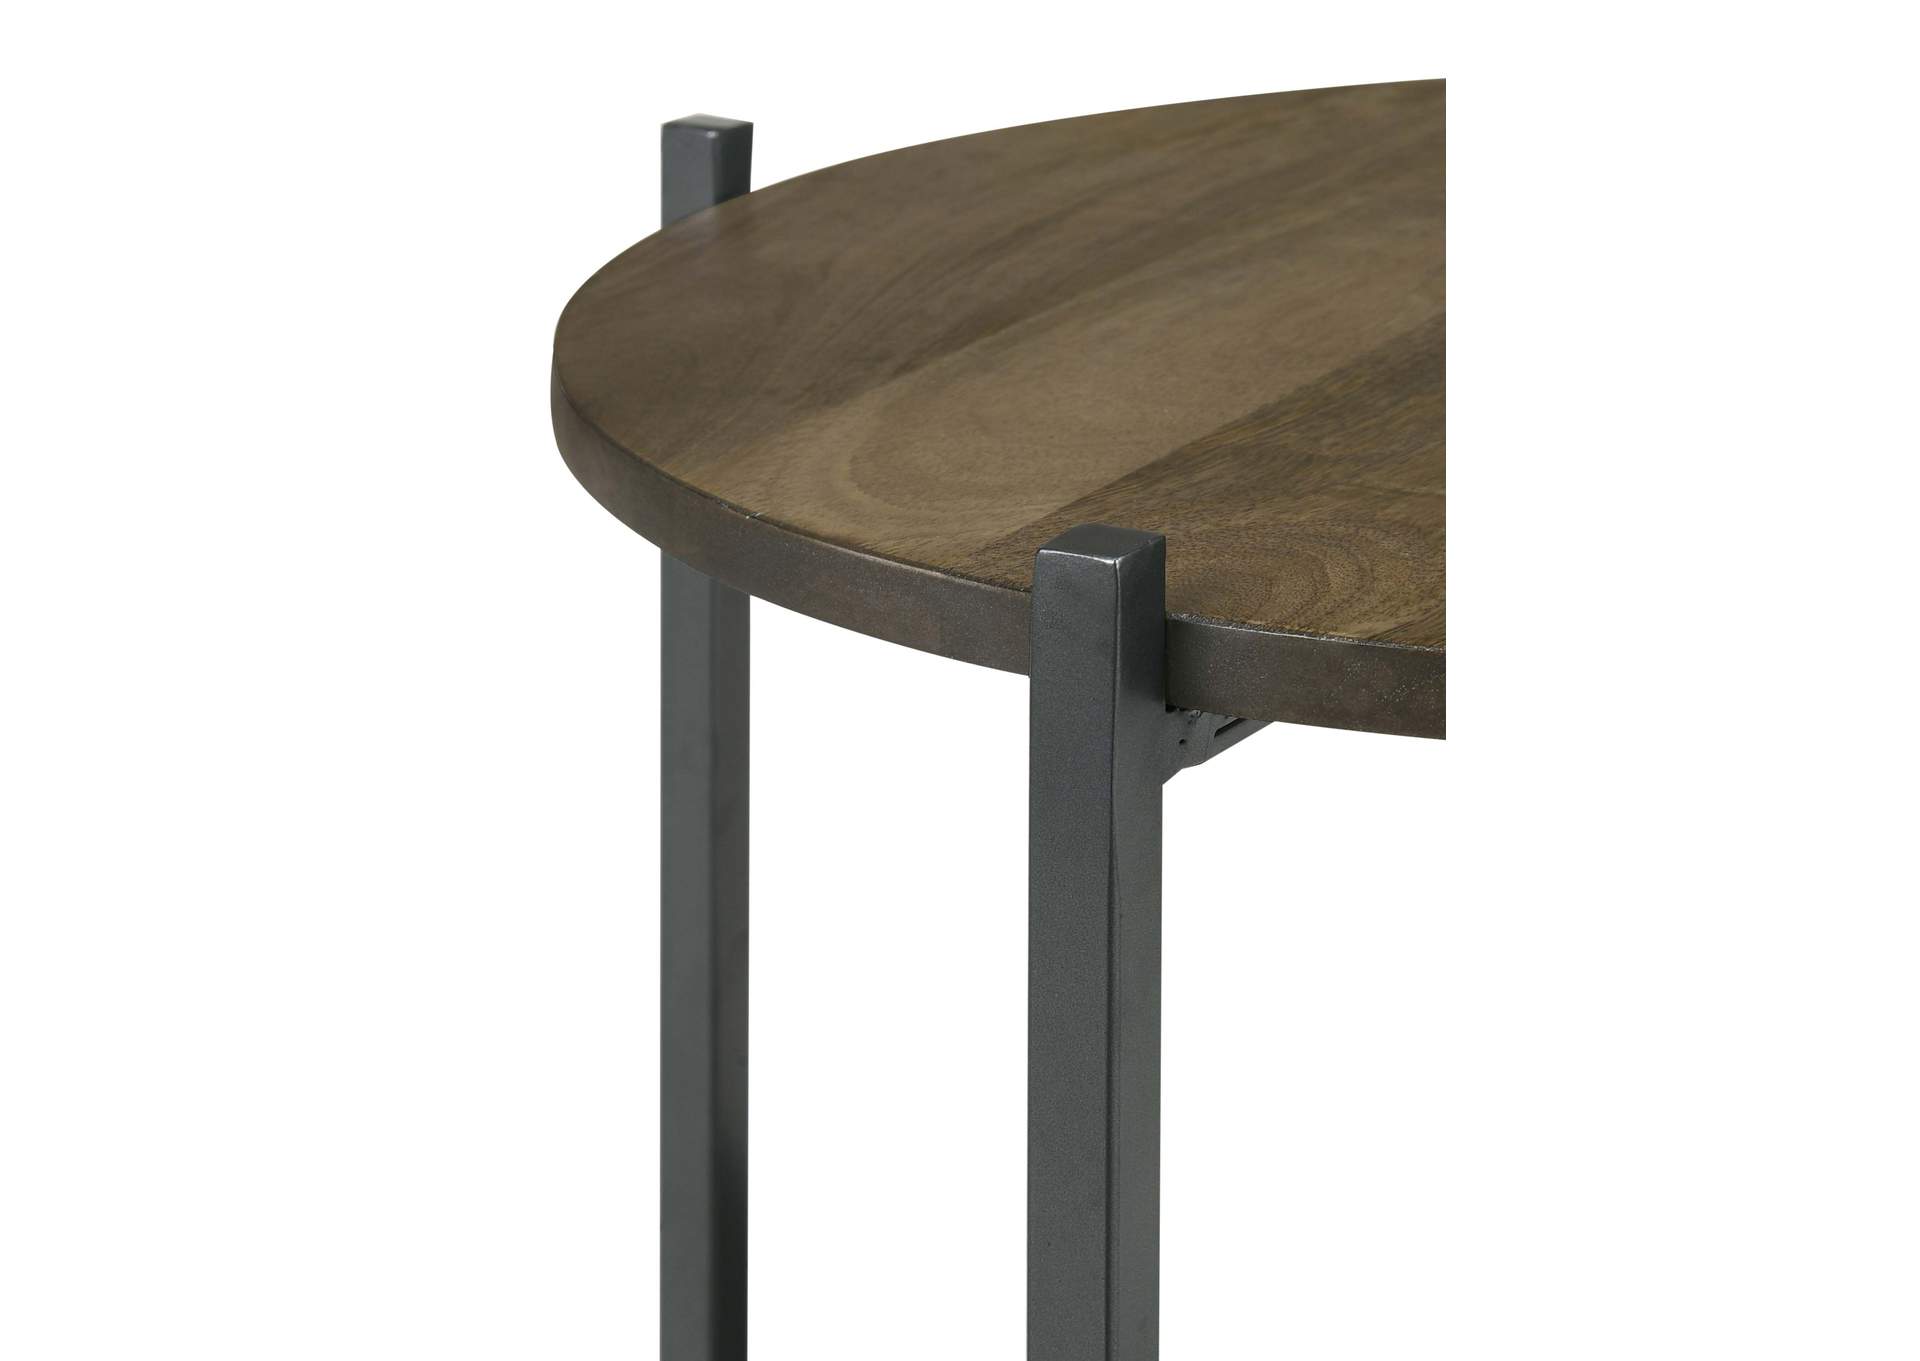 Axel Round Accent Table with Open Shelf Natural and Gunmetal,Coaster Furniture